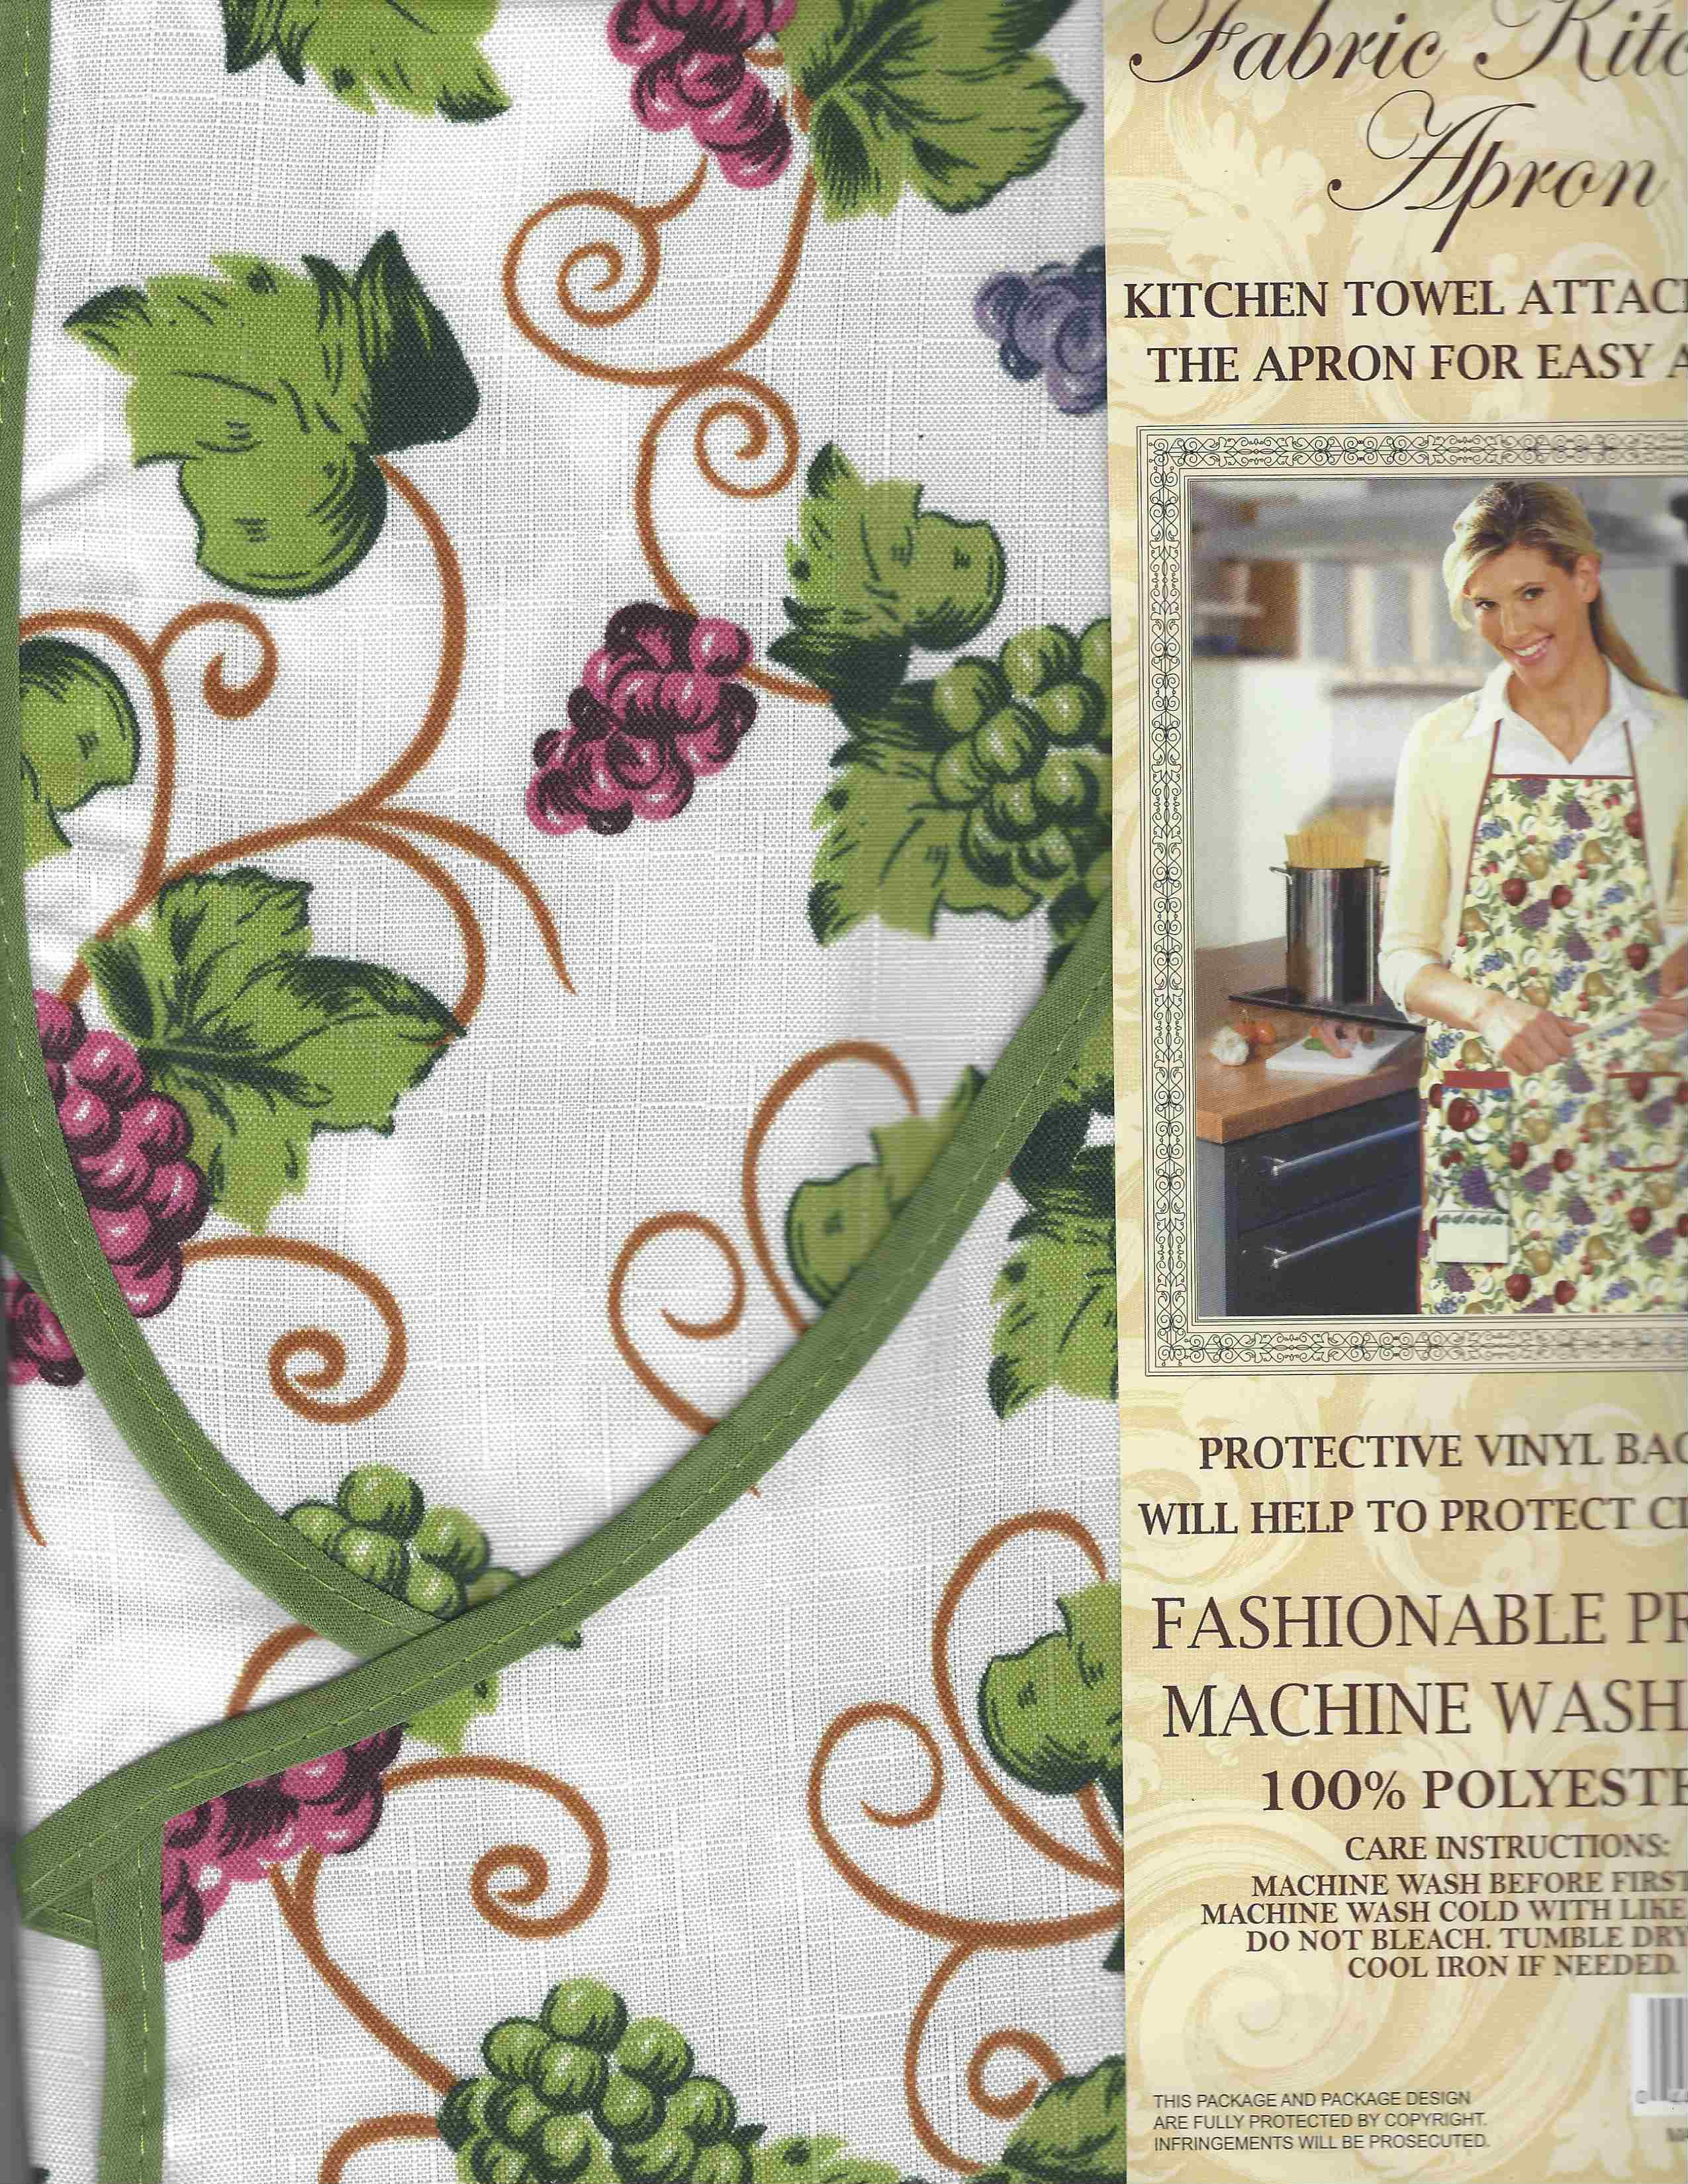 Grape Themed Towel and Craft or Kitchen Apron